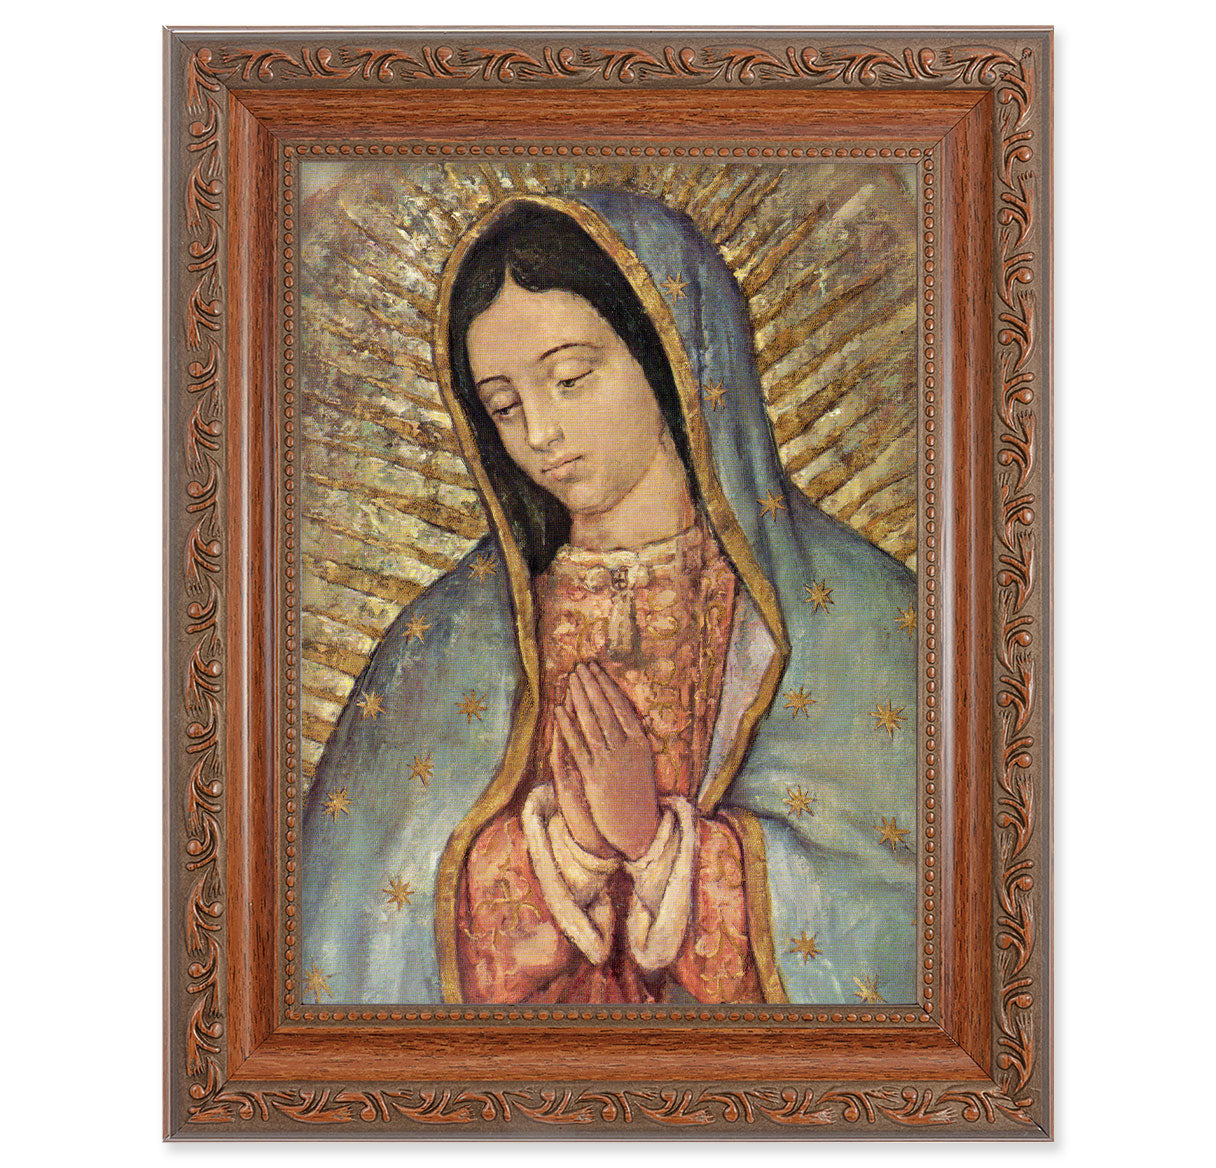 Our Lady of Guadalupe Mahogany Finish Framed Art